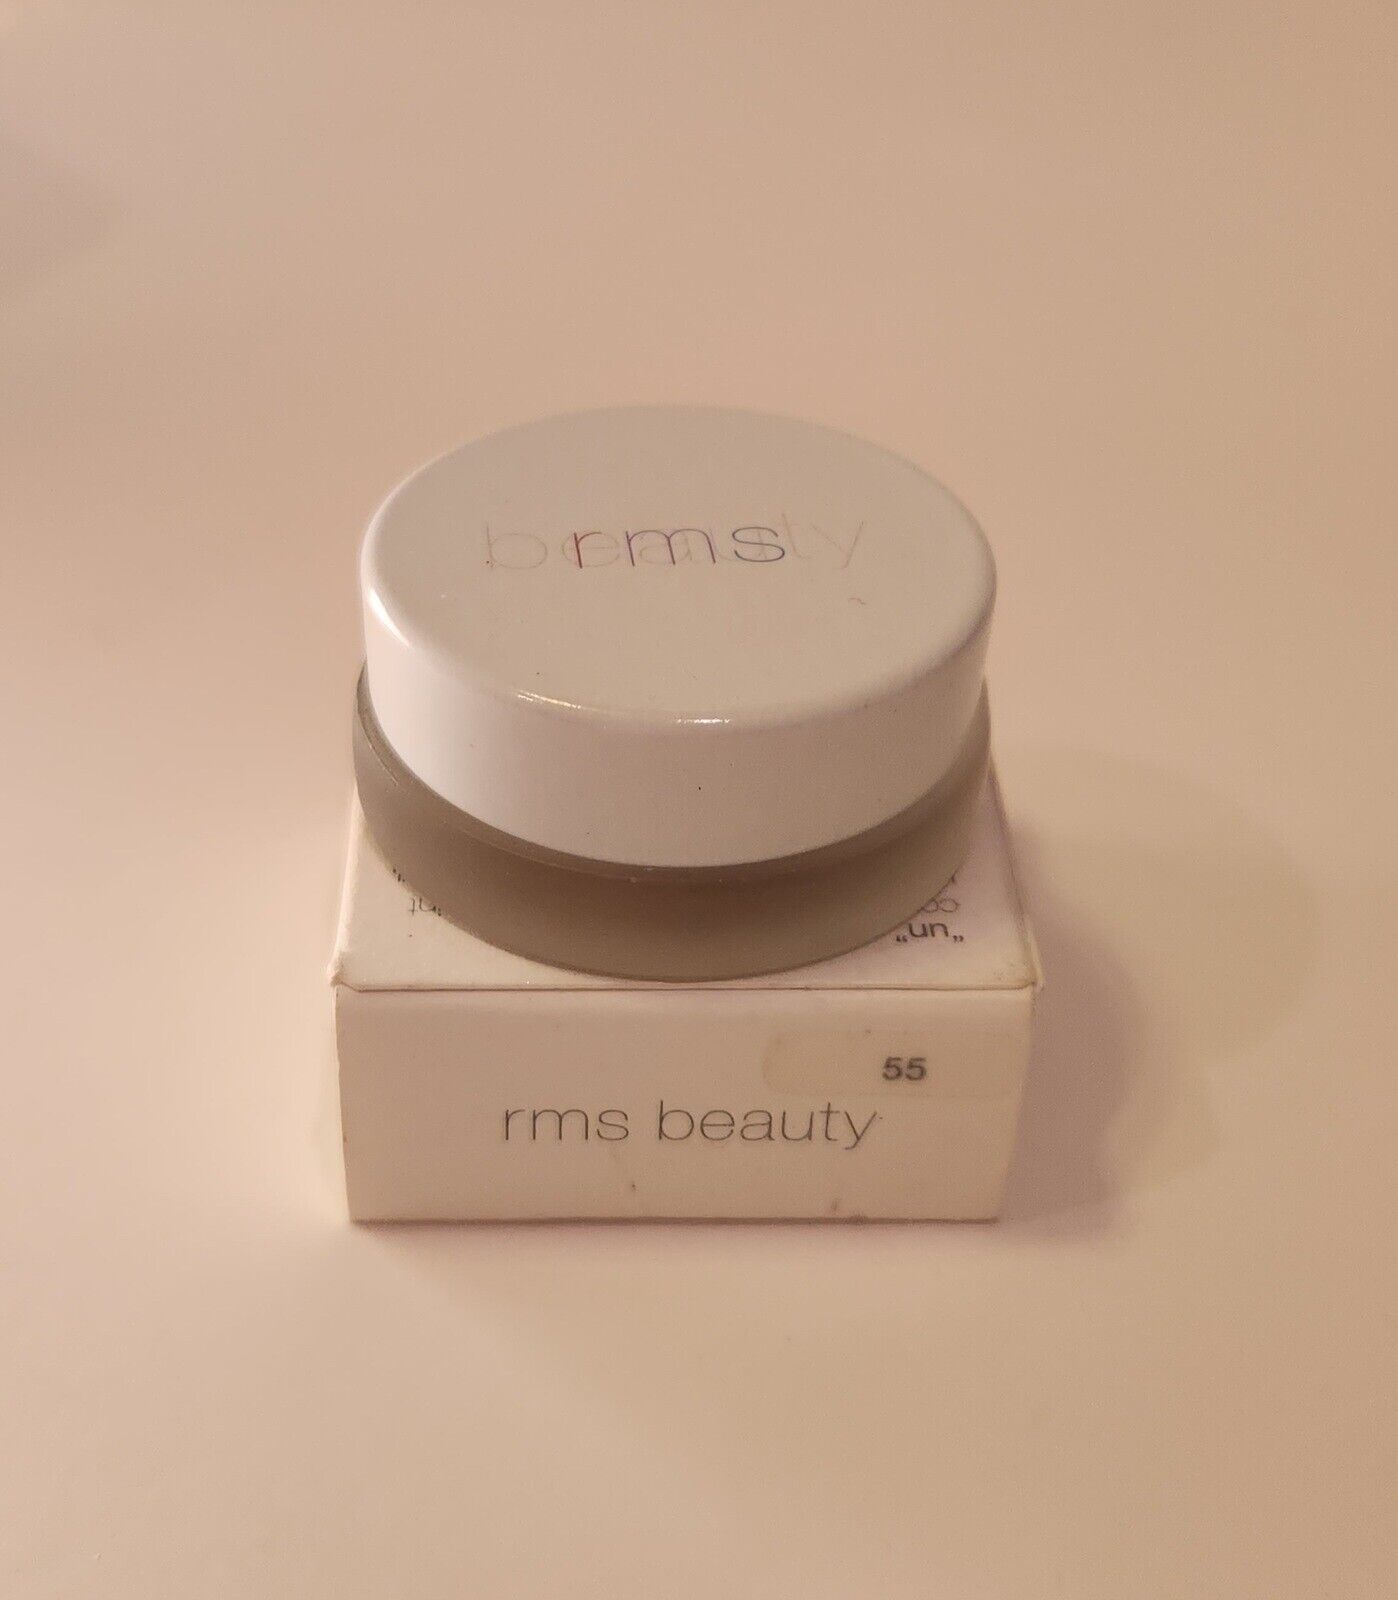 Primary image for RMS Beauty "Un" Cover-Up: 55, .20oz